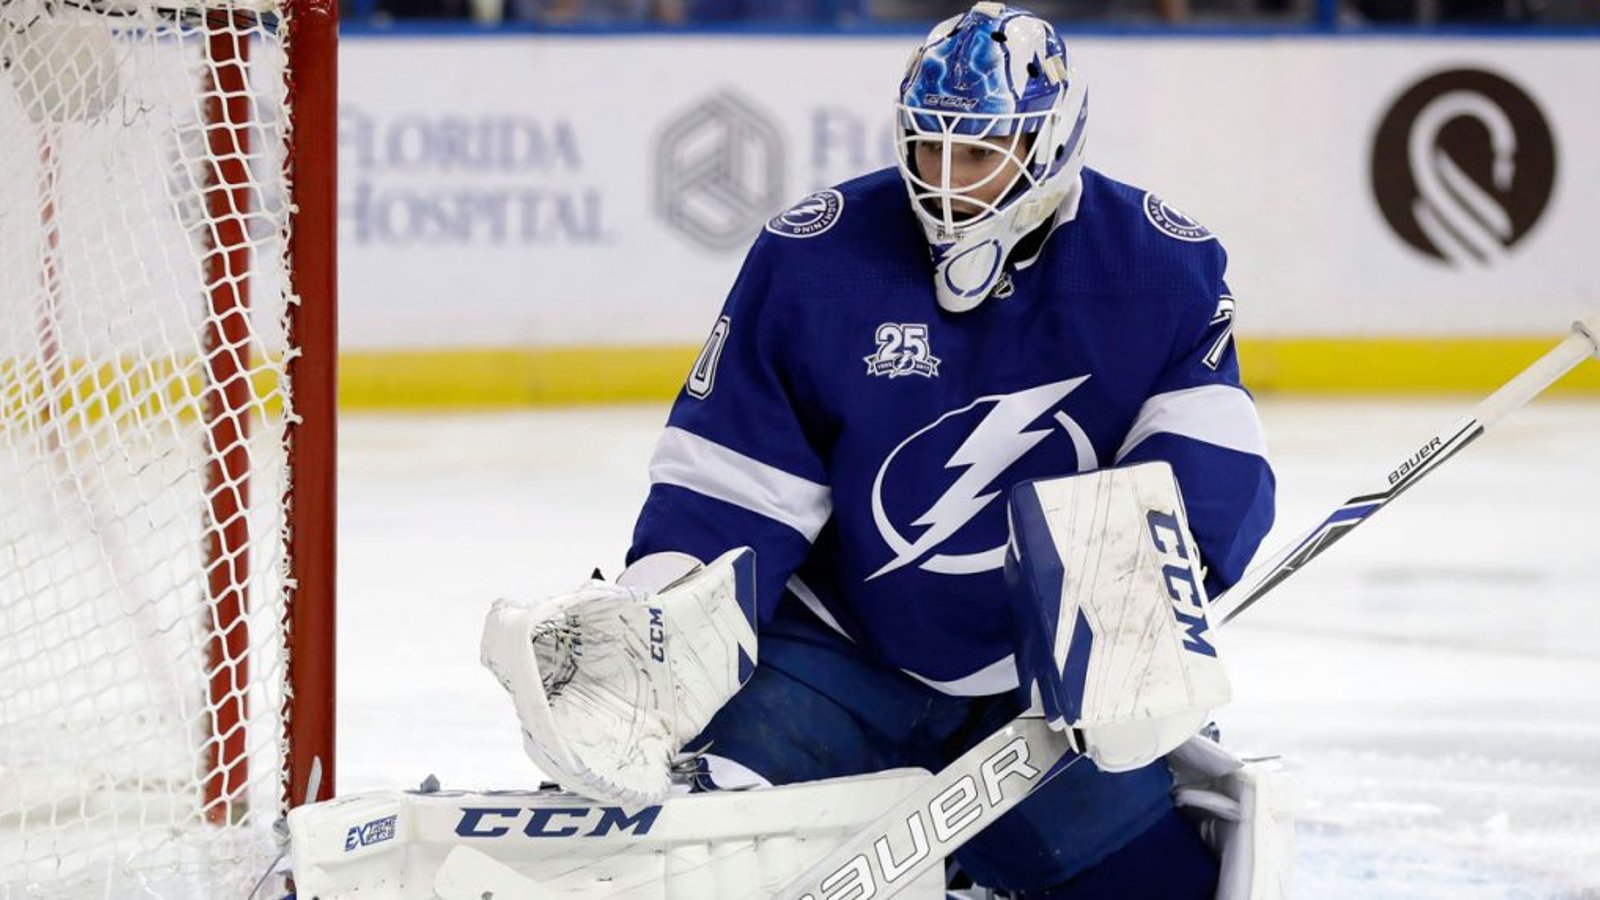 Goalie Domingue placed on waivers after failed trade 